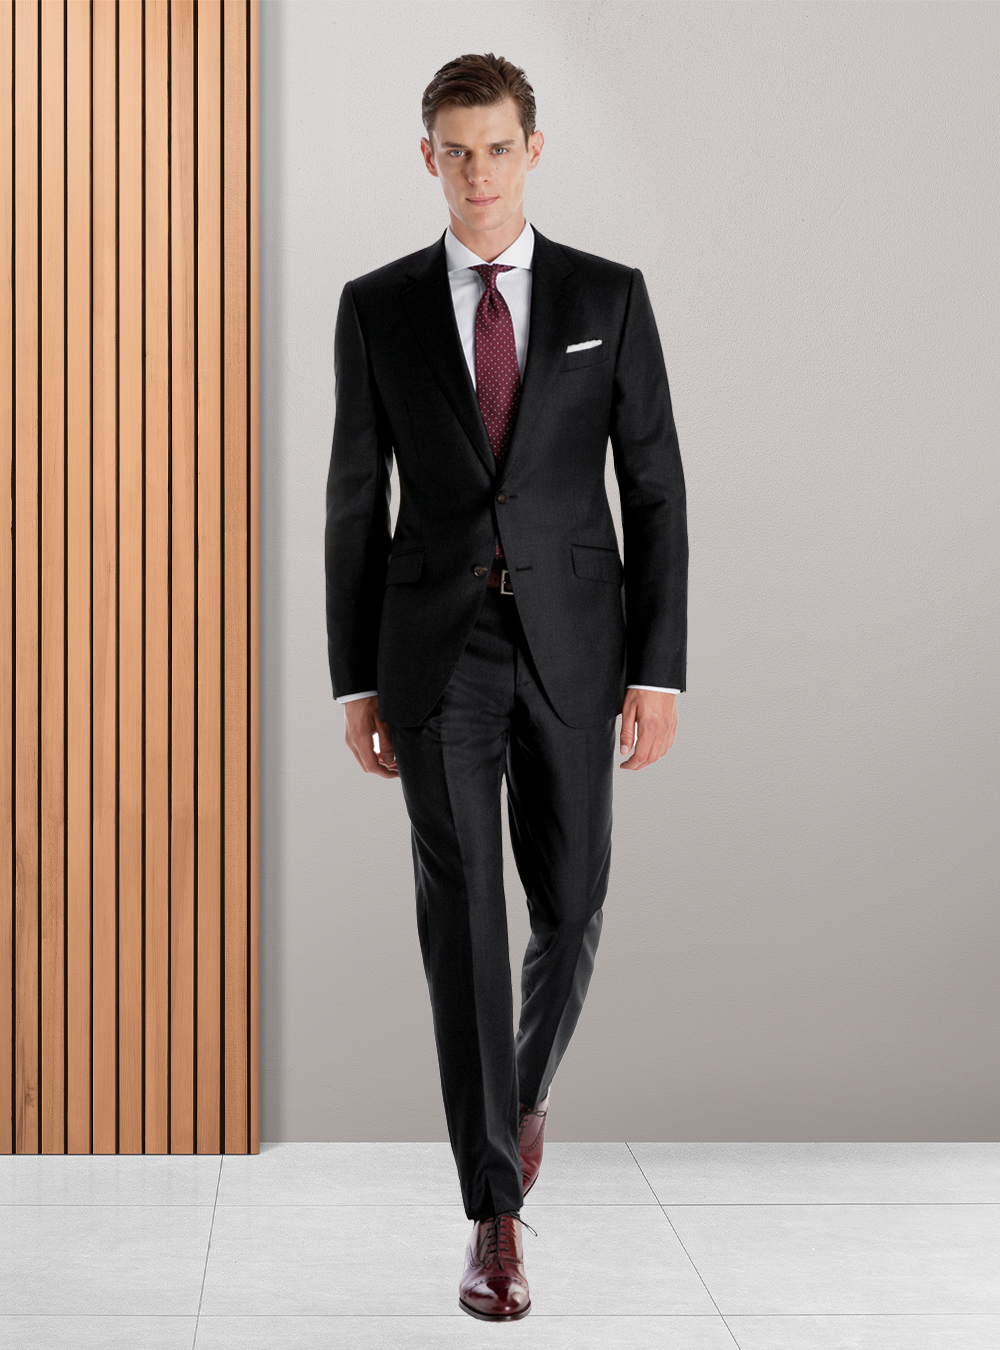 black suit, white dress shirt, burgundy tie, and burgundy oxford shoes